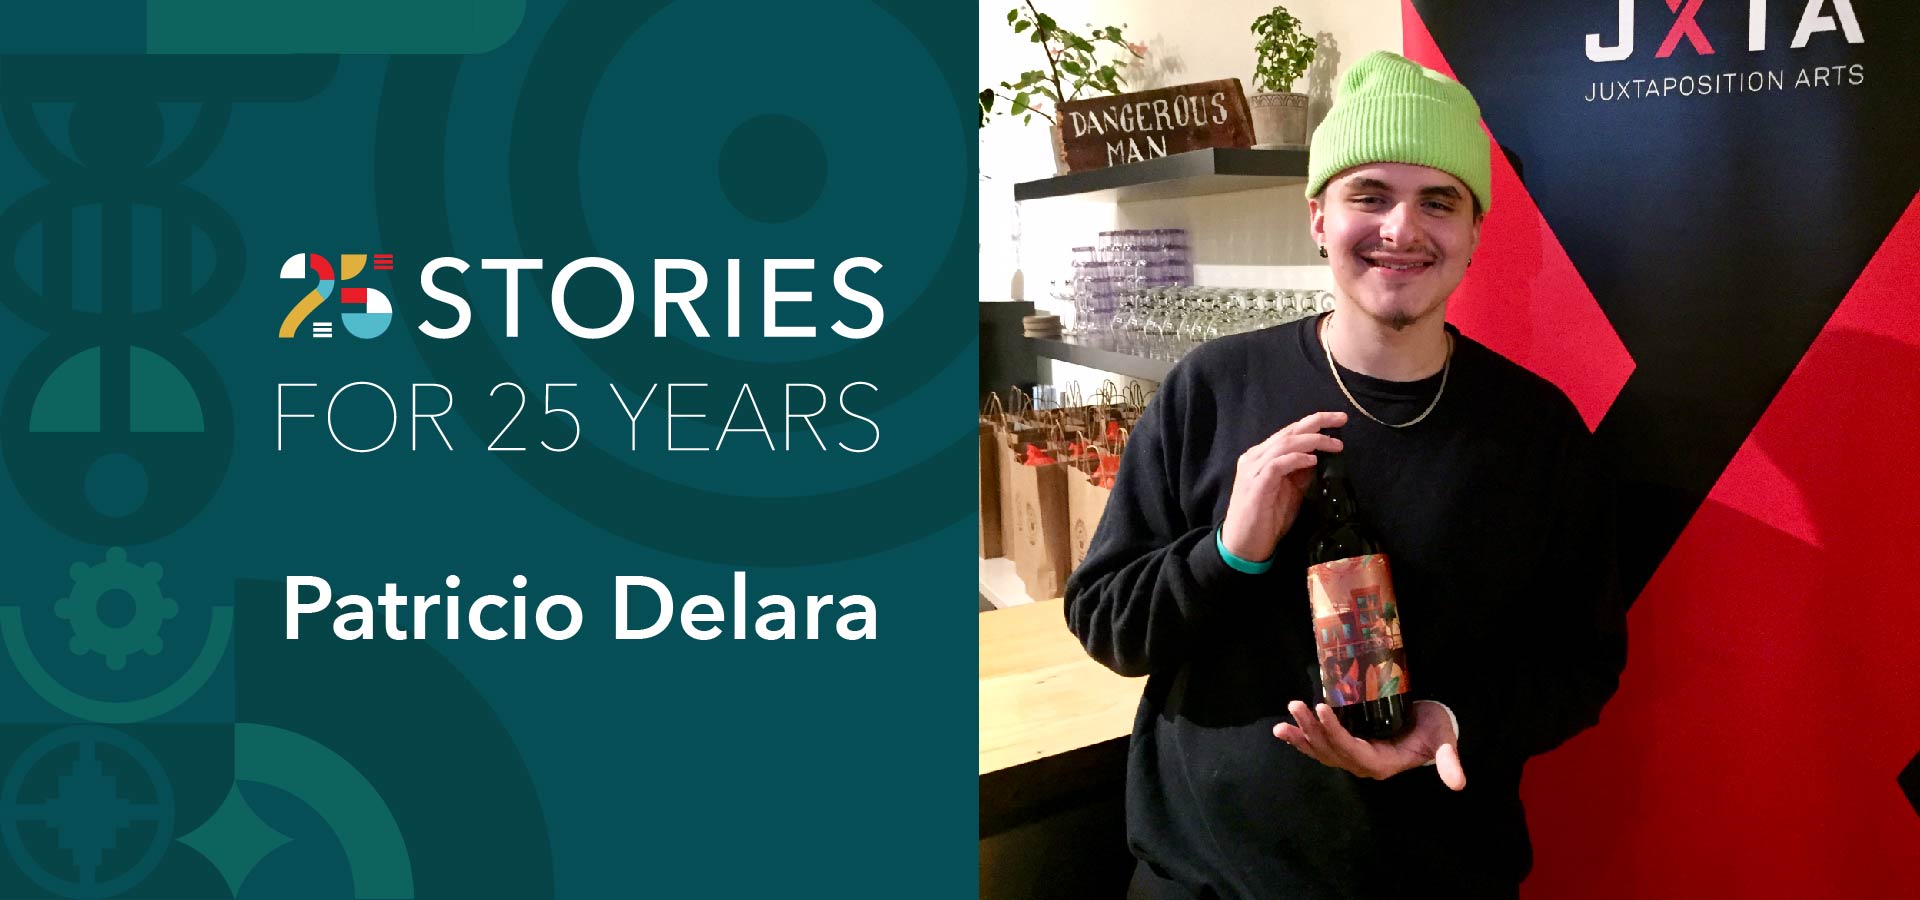 A young person holding a bottle with a decoratively designed label. Title: 25 stories for 25 years, Patricio De Lara